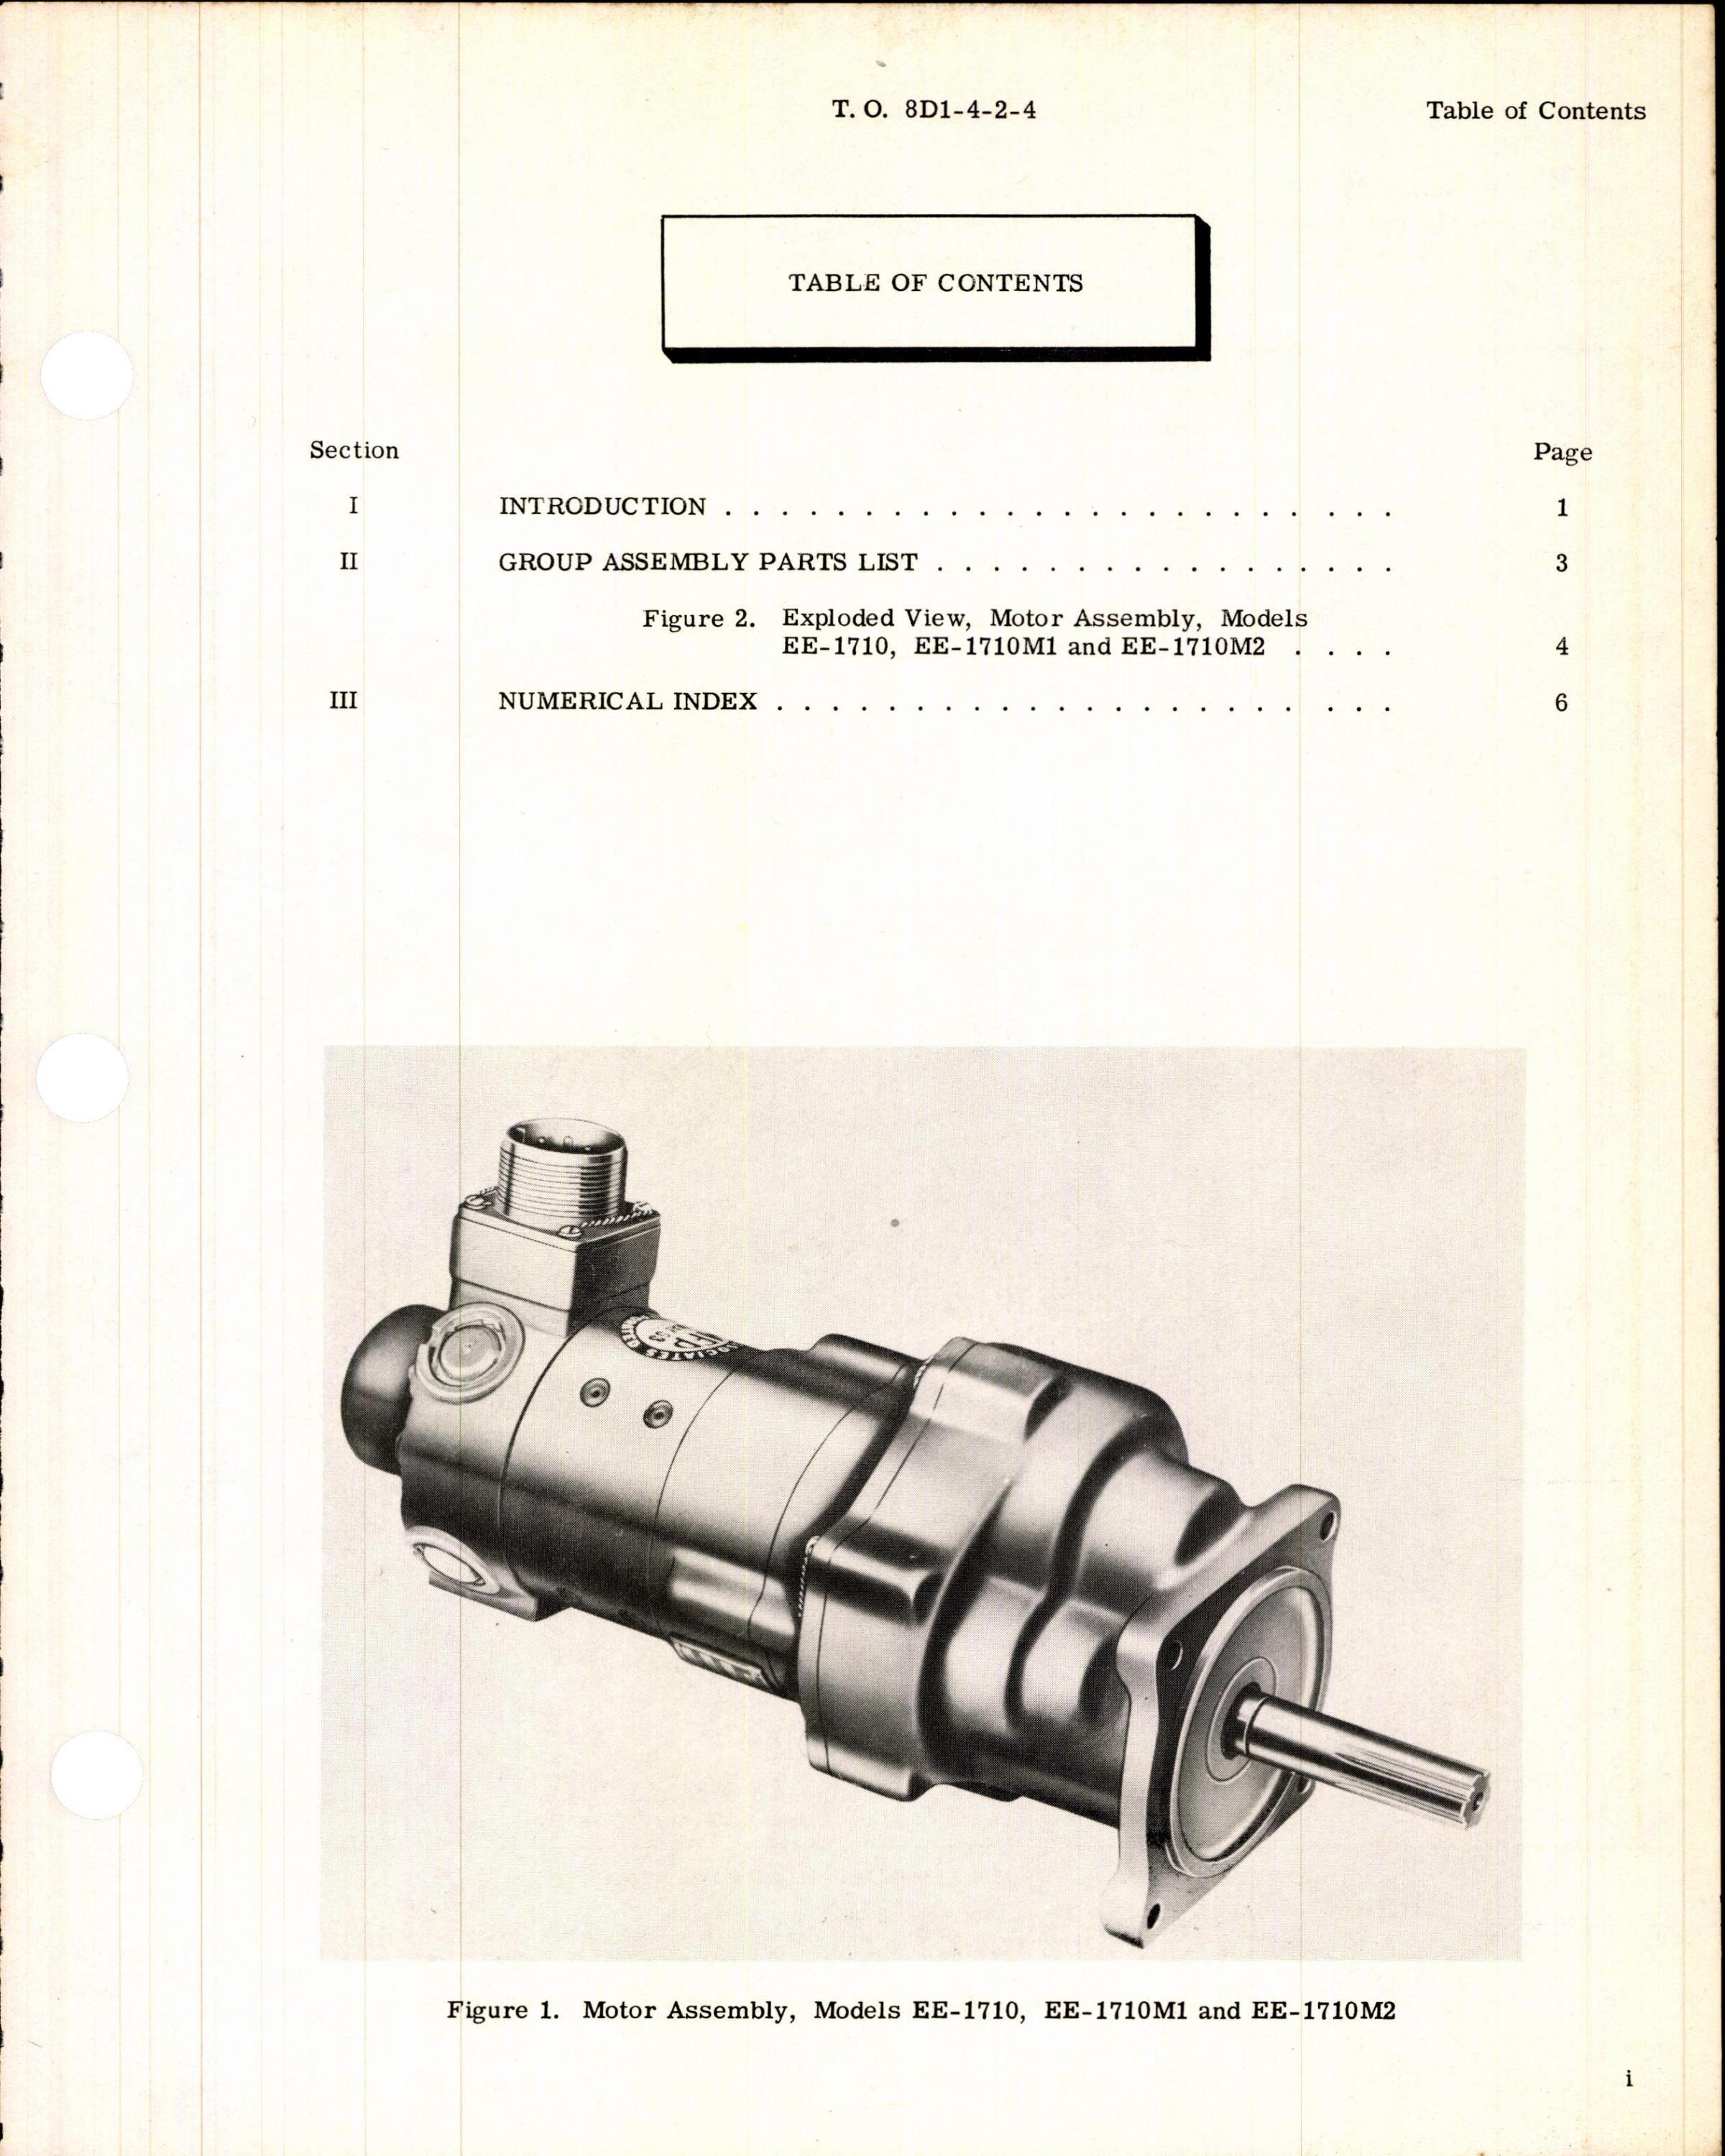 Sample page 3 from AirCorps Library document: Illustrated Parts Breakdown for Air Associates Motor Assembly